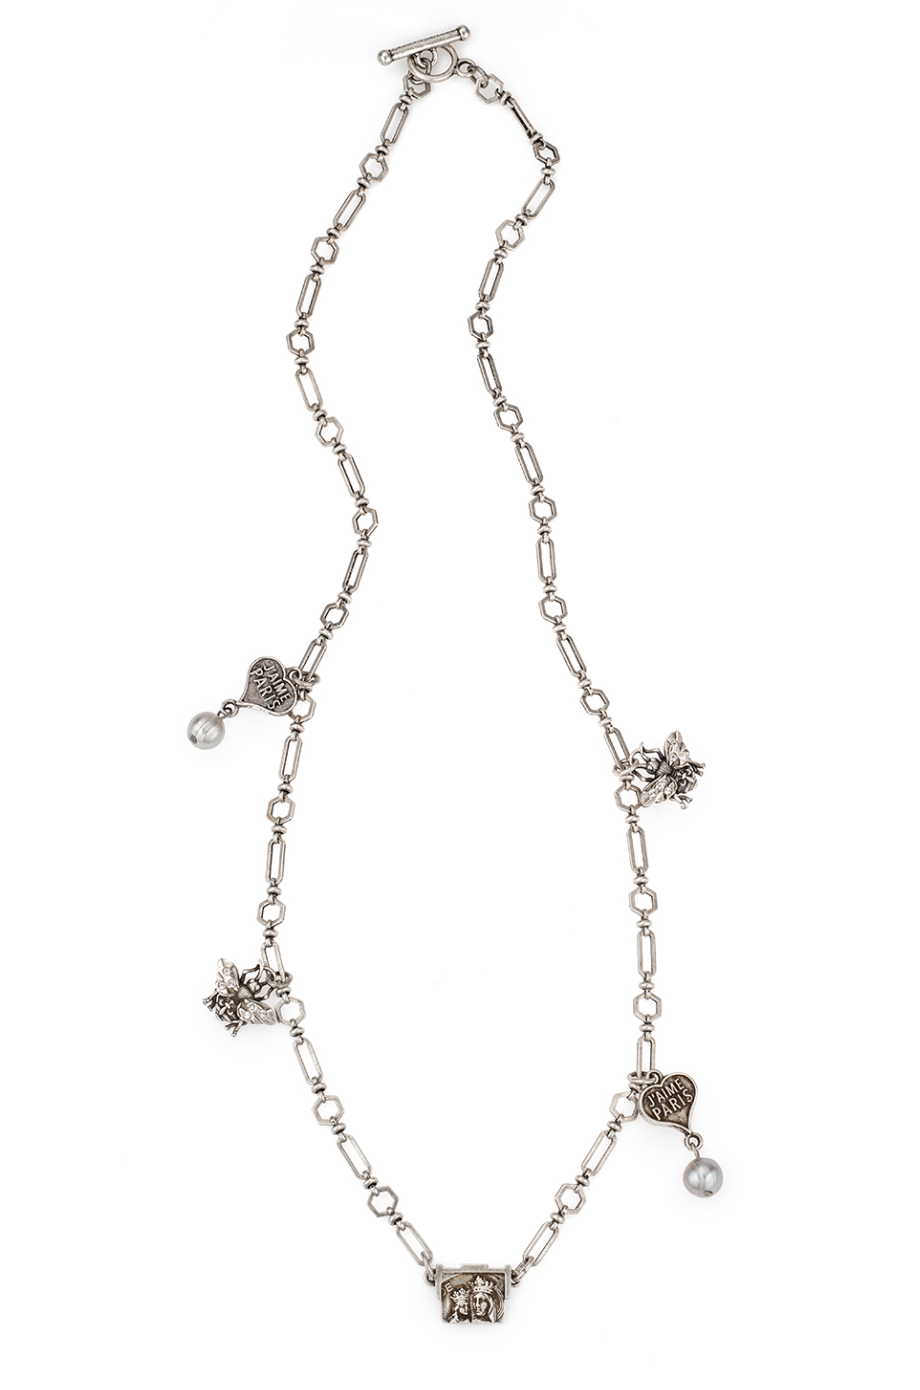 Toulouse Chain with Coeur, FK Bee & Saint Anne Pendants Necklace